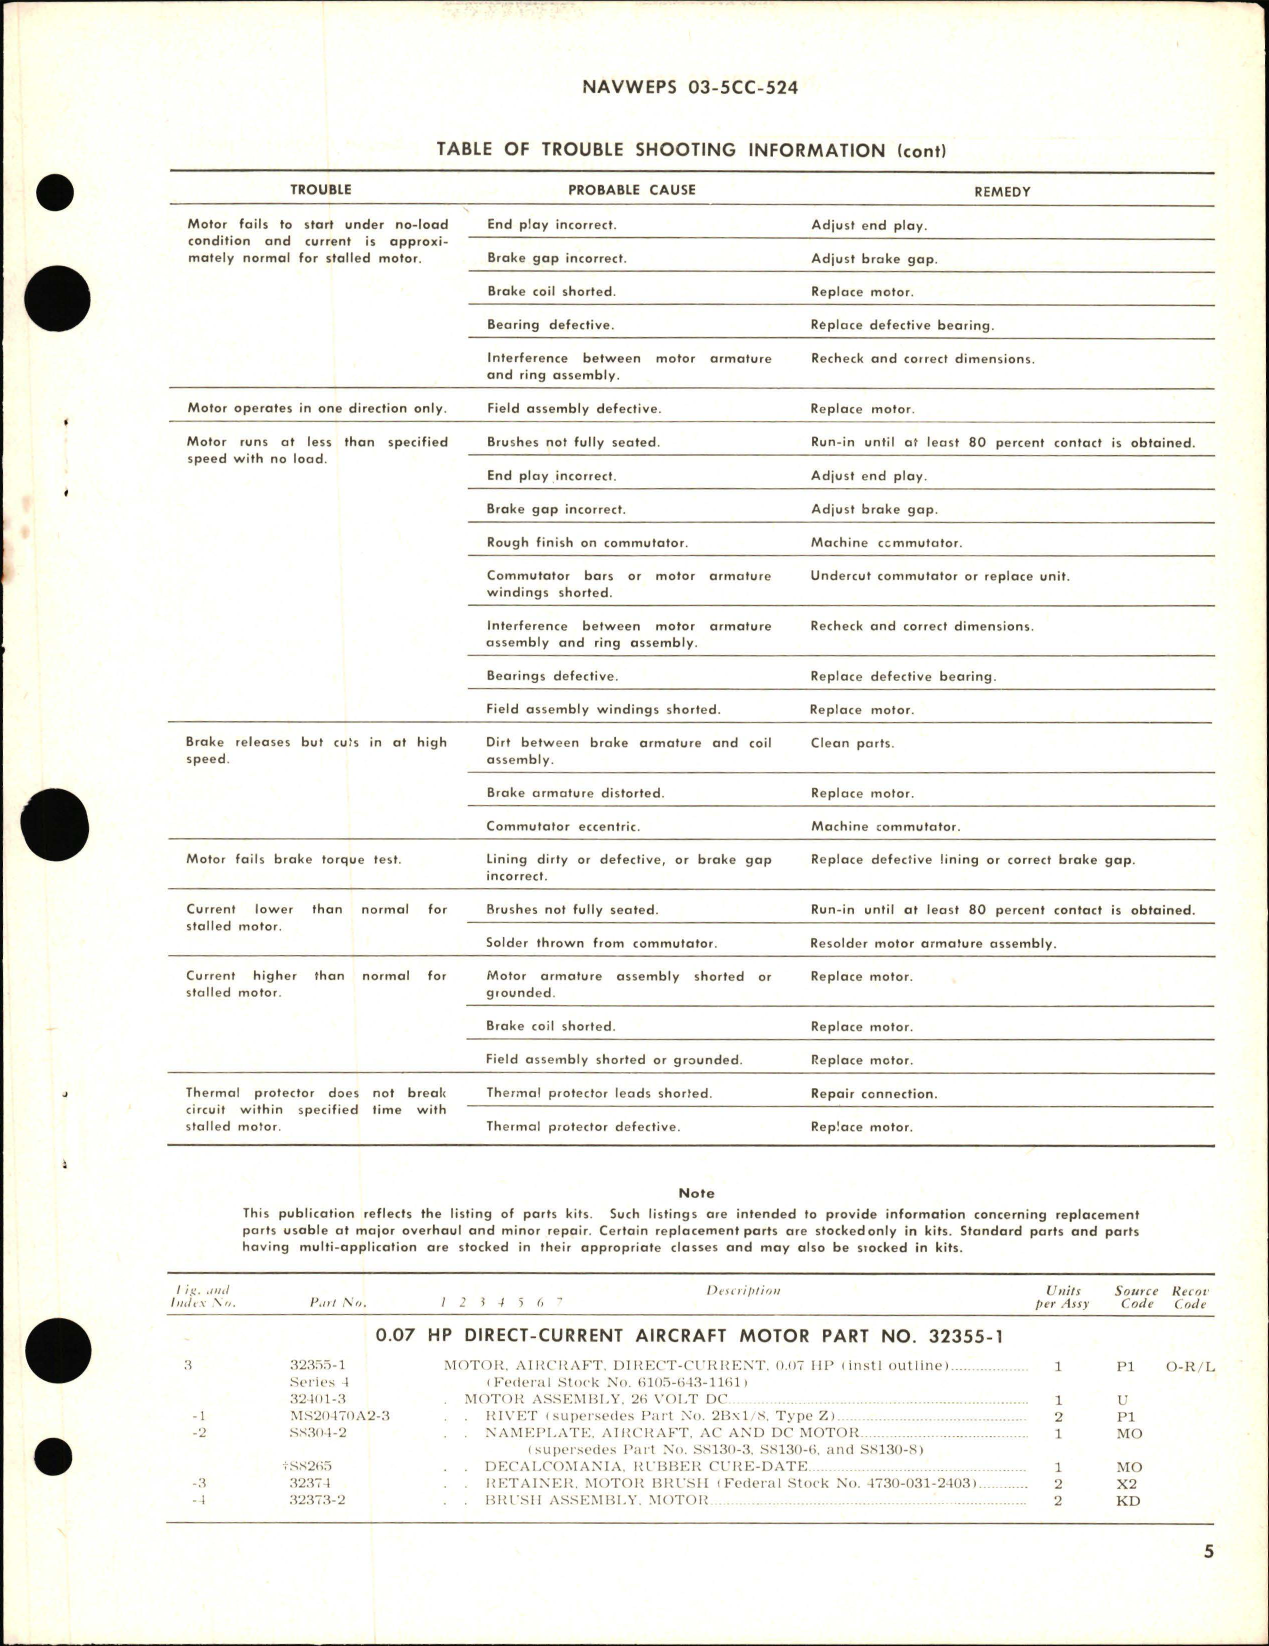 Sample page 5 from AirCorps Library document: Overhaul Instructions with Parts Breakdown for HP Direct Current Aircraft Motor 0.07 - Part 32355-1